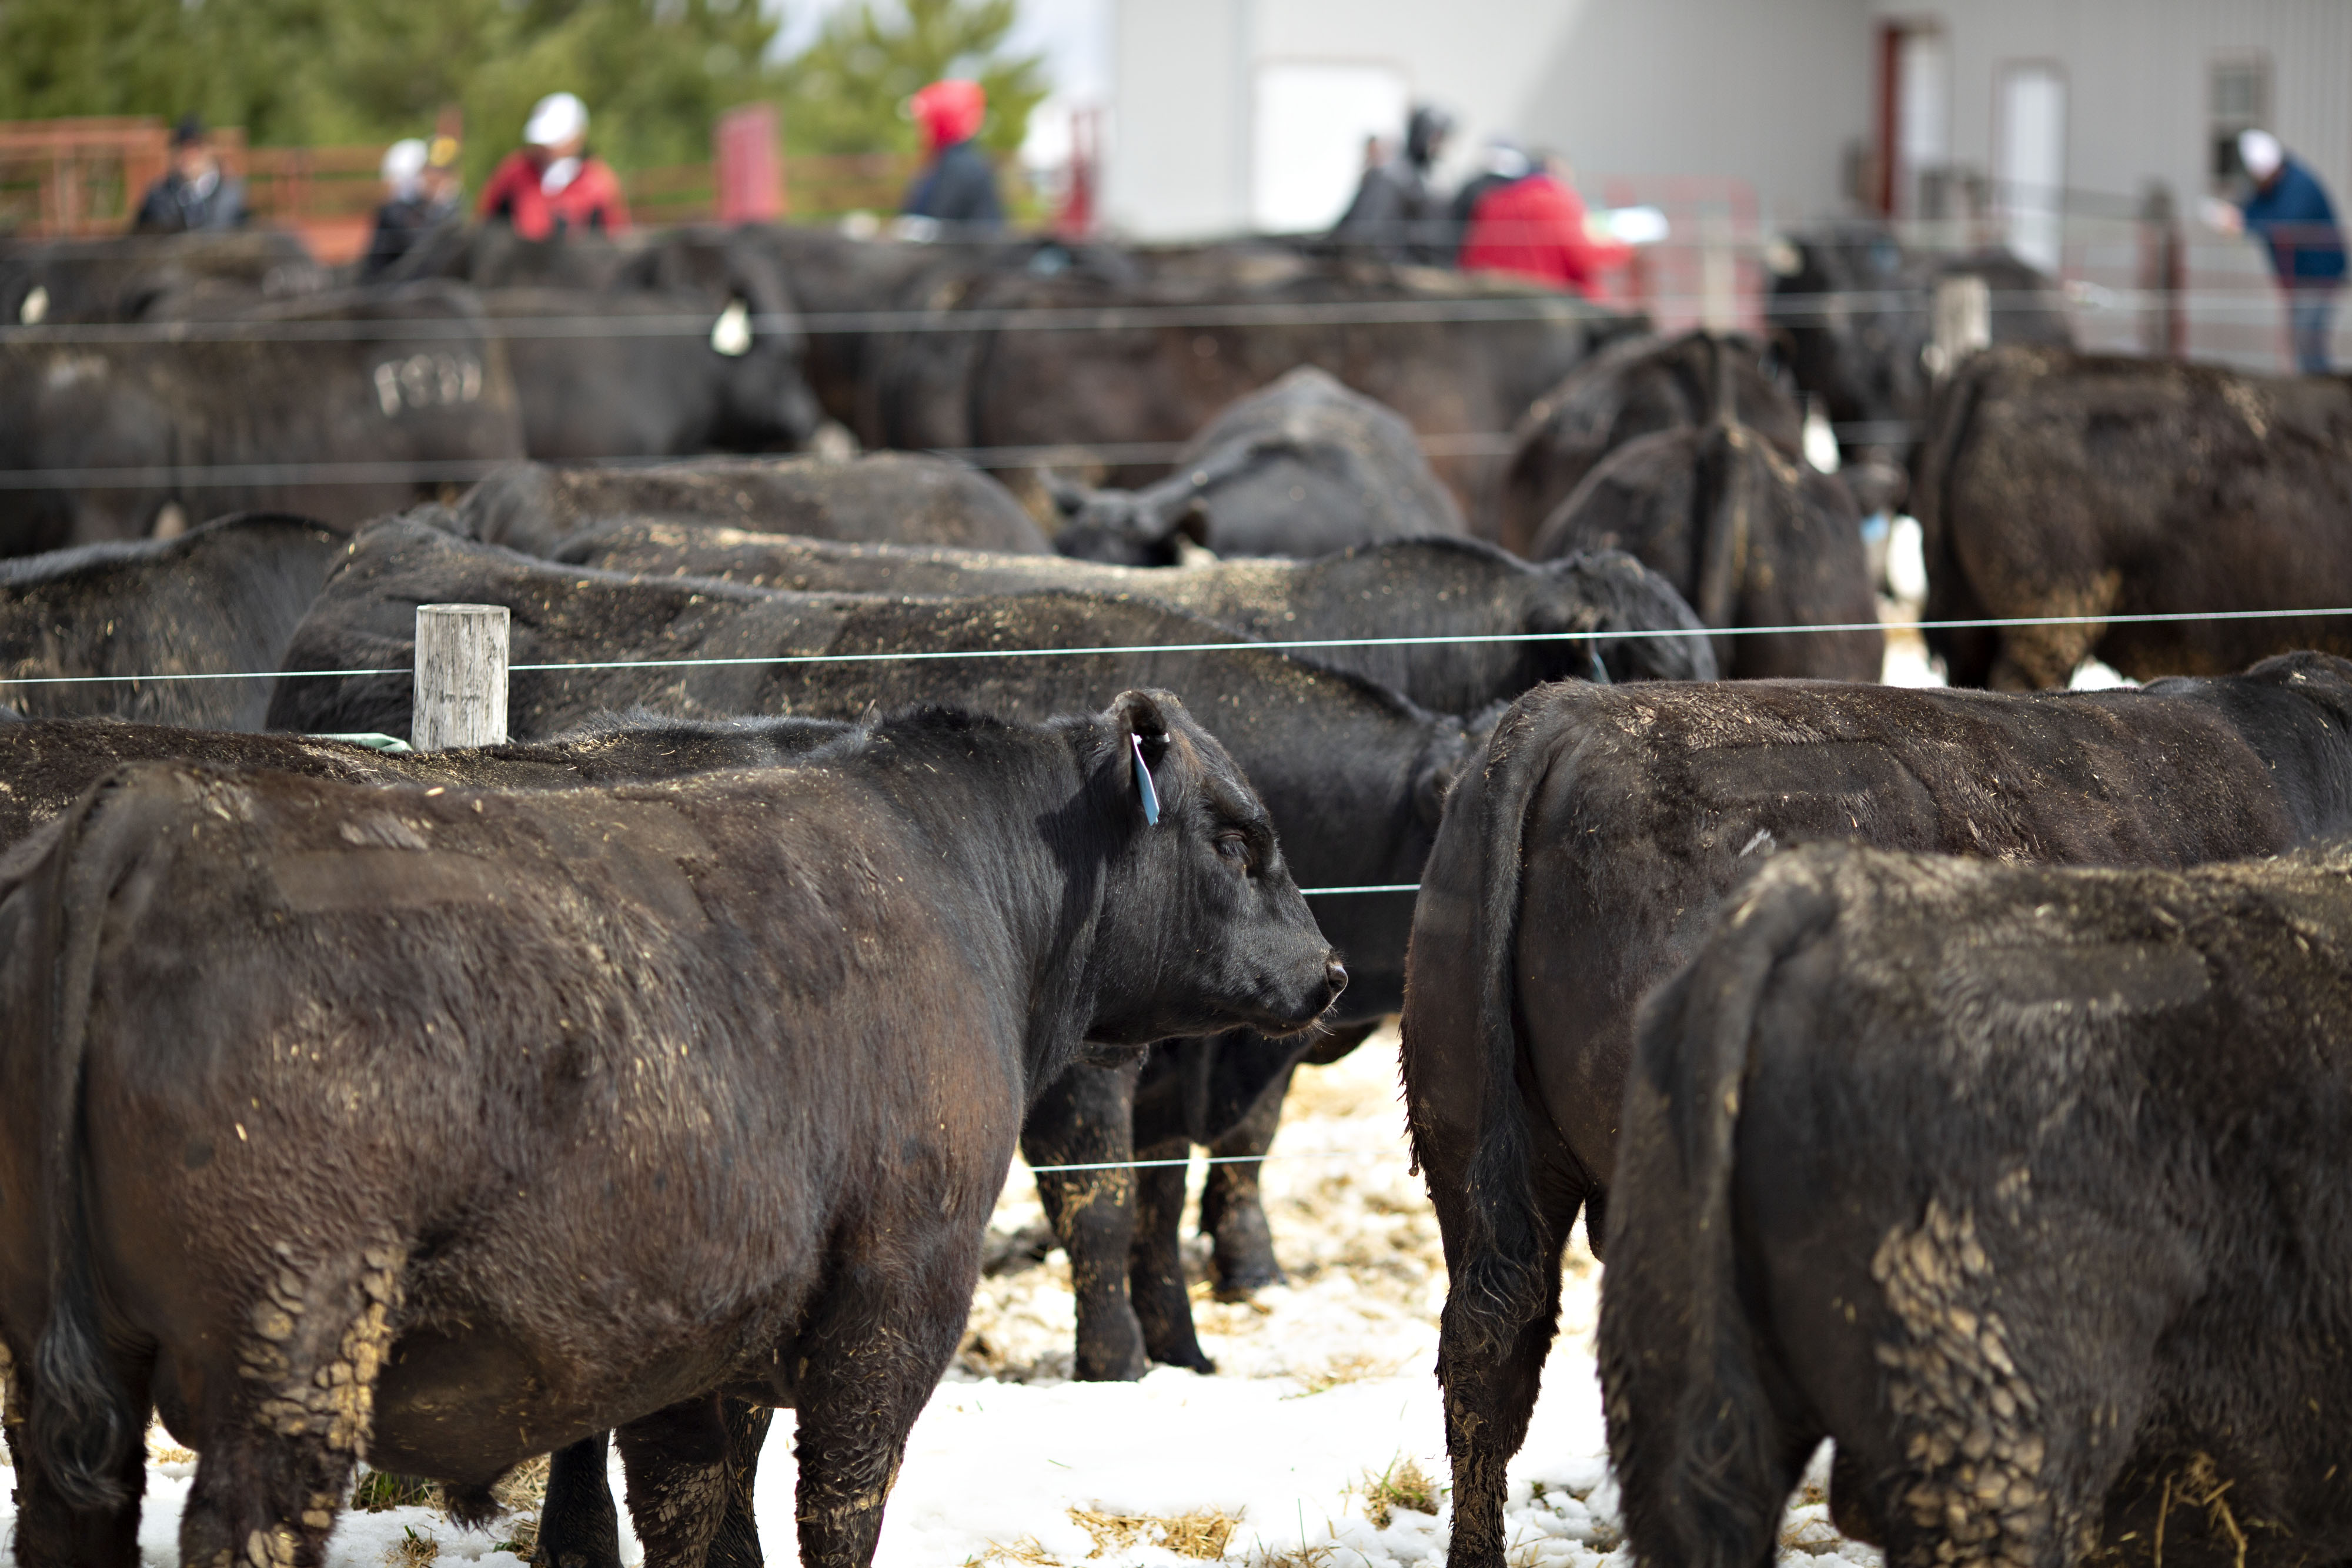 Angus bulls stand in pens prior to an auction at Woodhill Farms in Viroqua, Wisconsin.